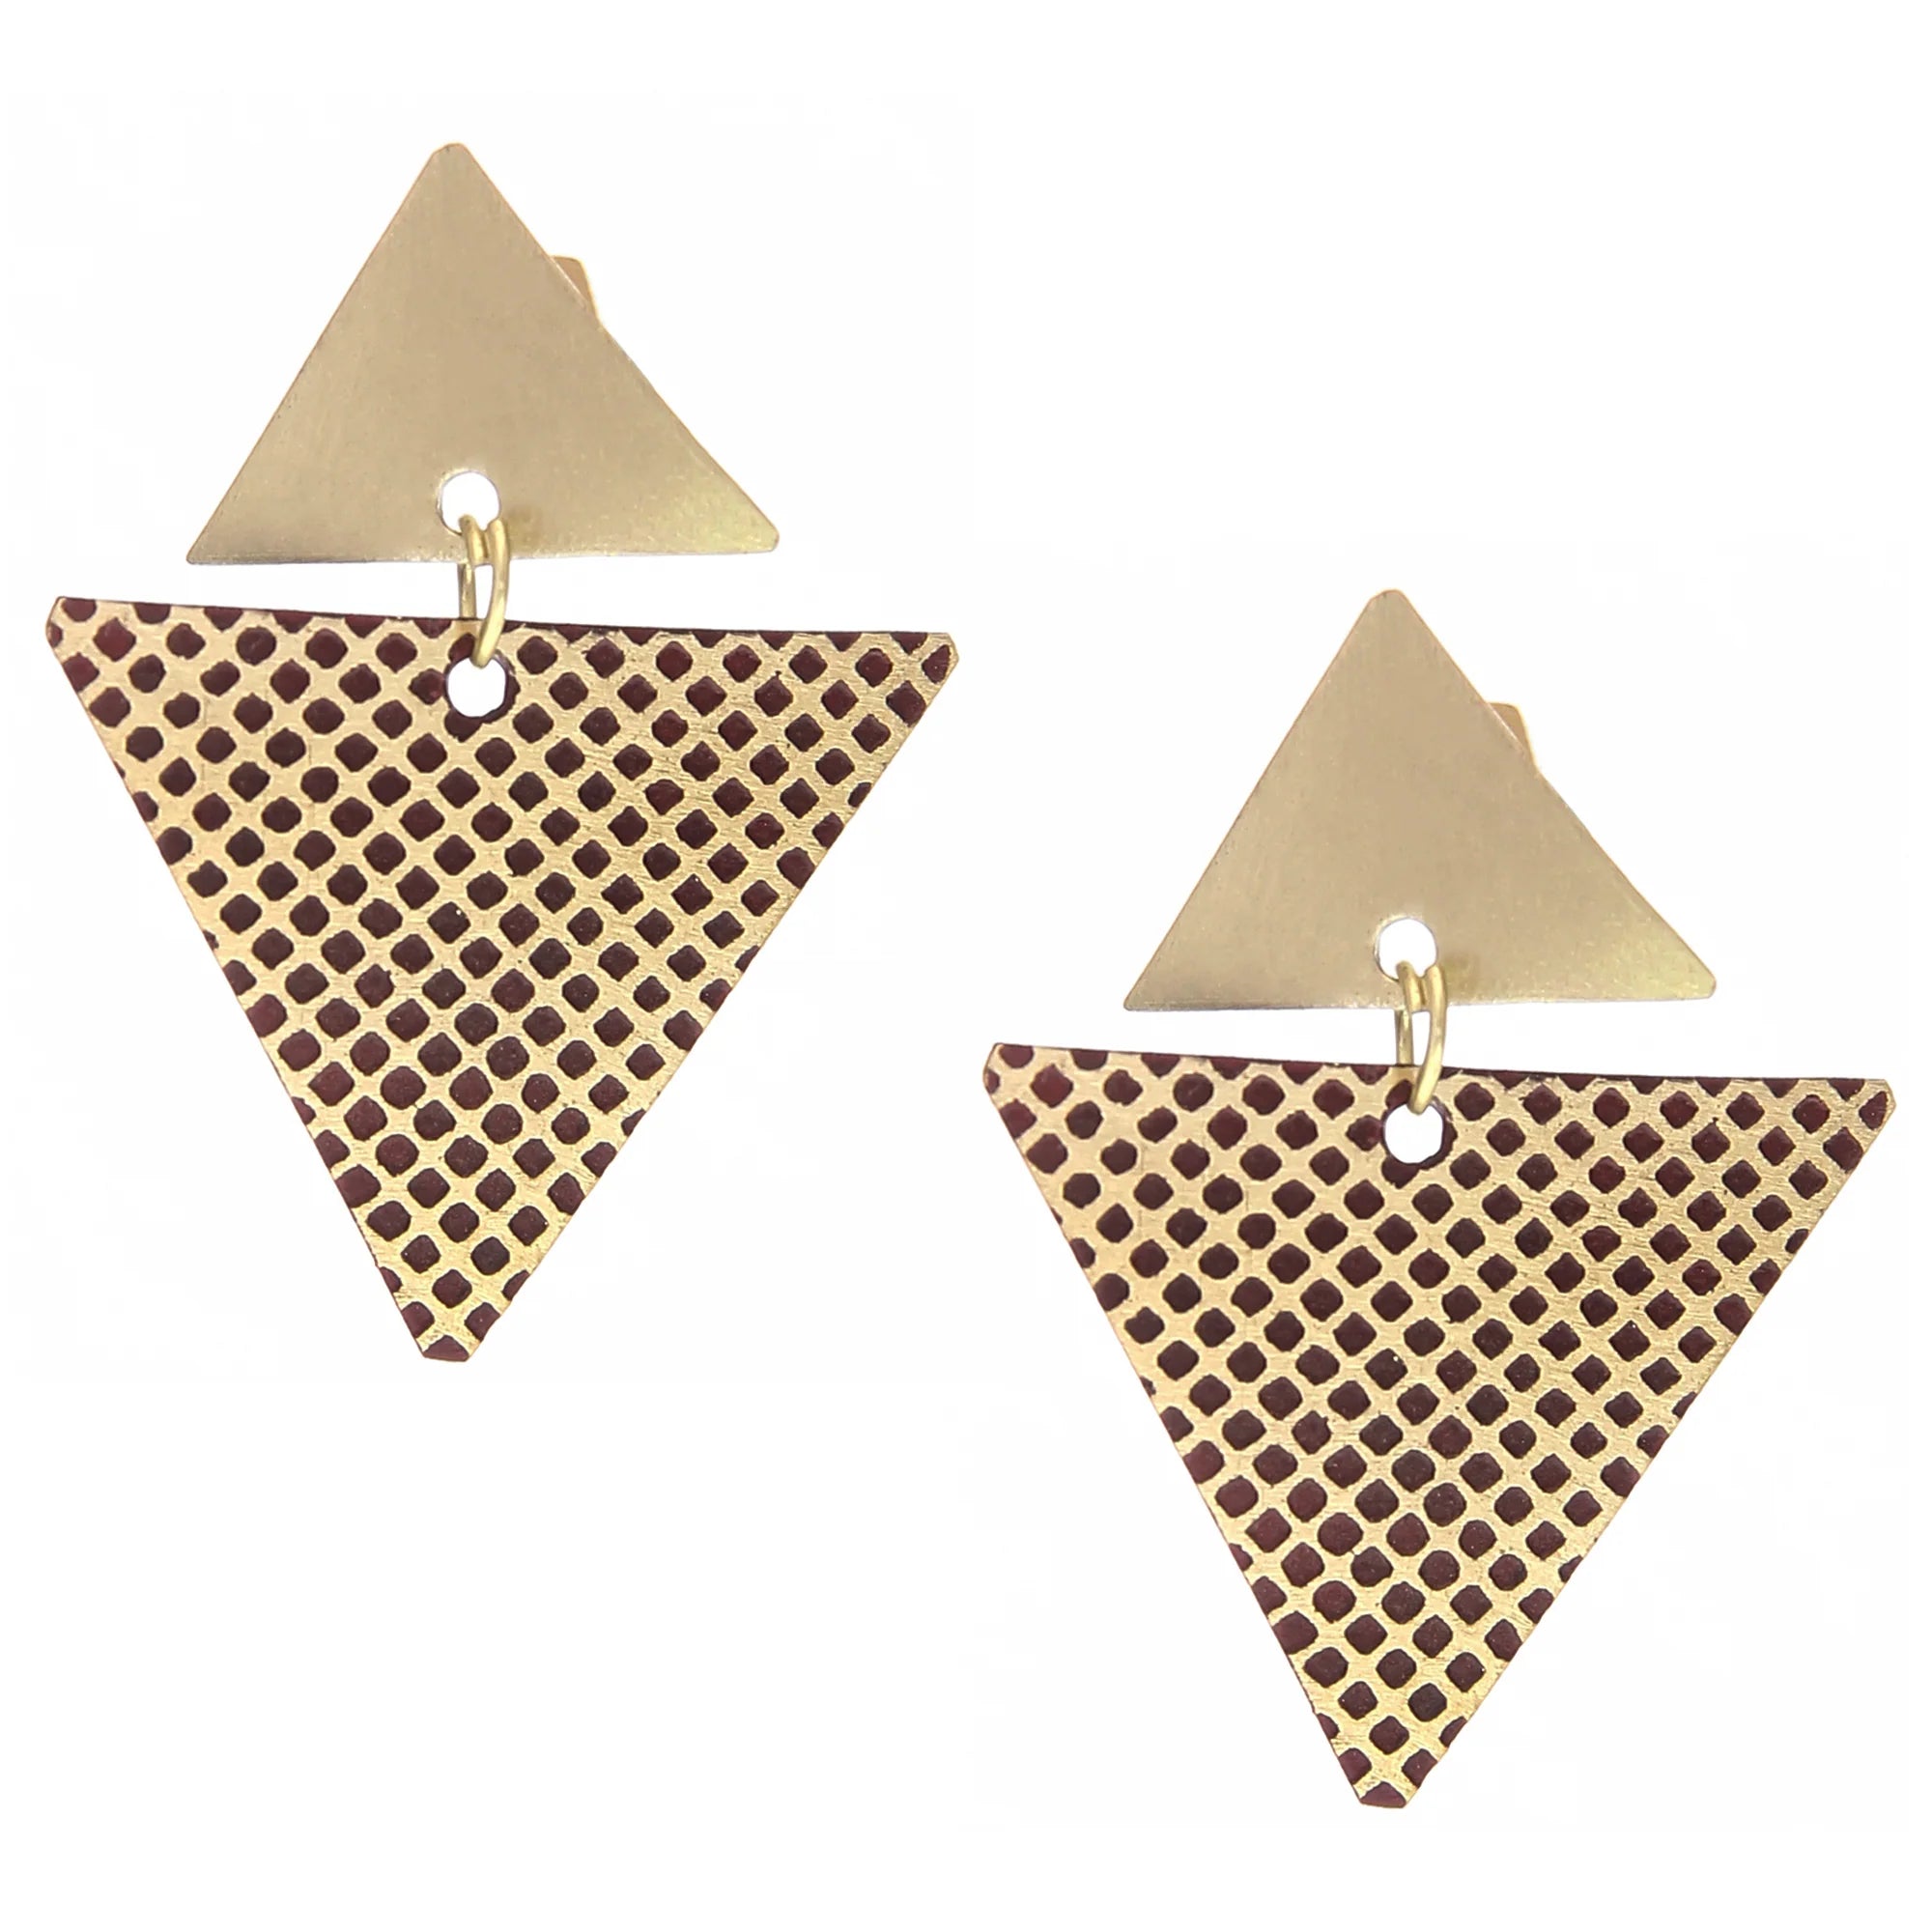 Earrings photographed against white backdrop. These earrings come with one golden triangle atop a larger upside-down triangle.